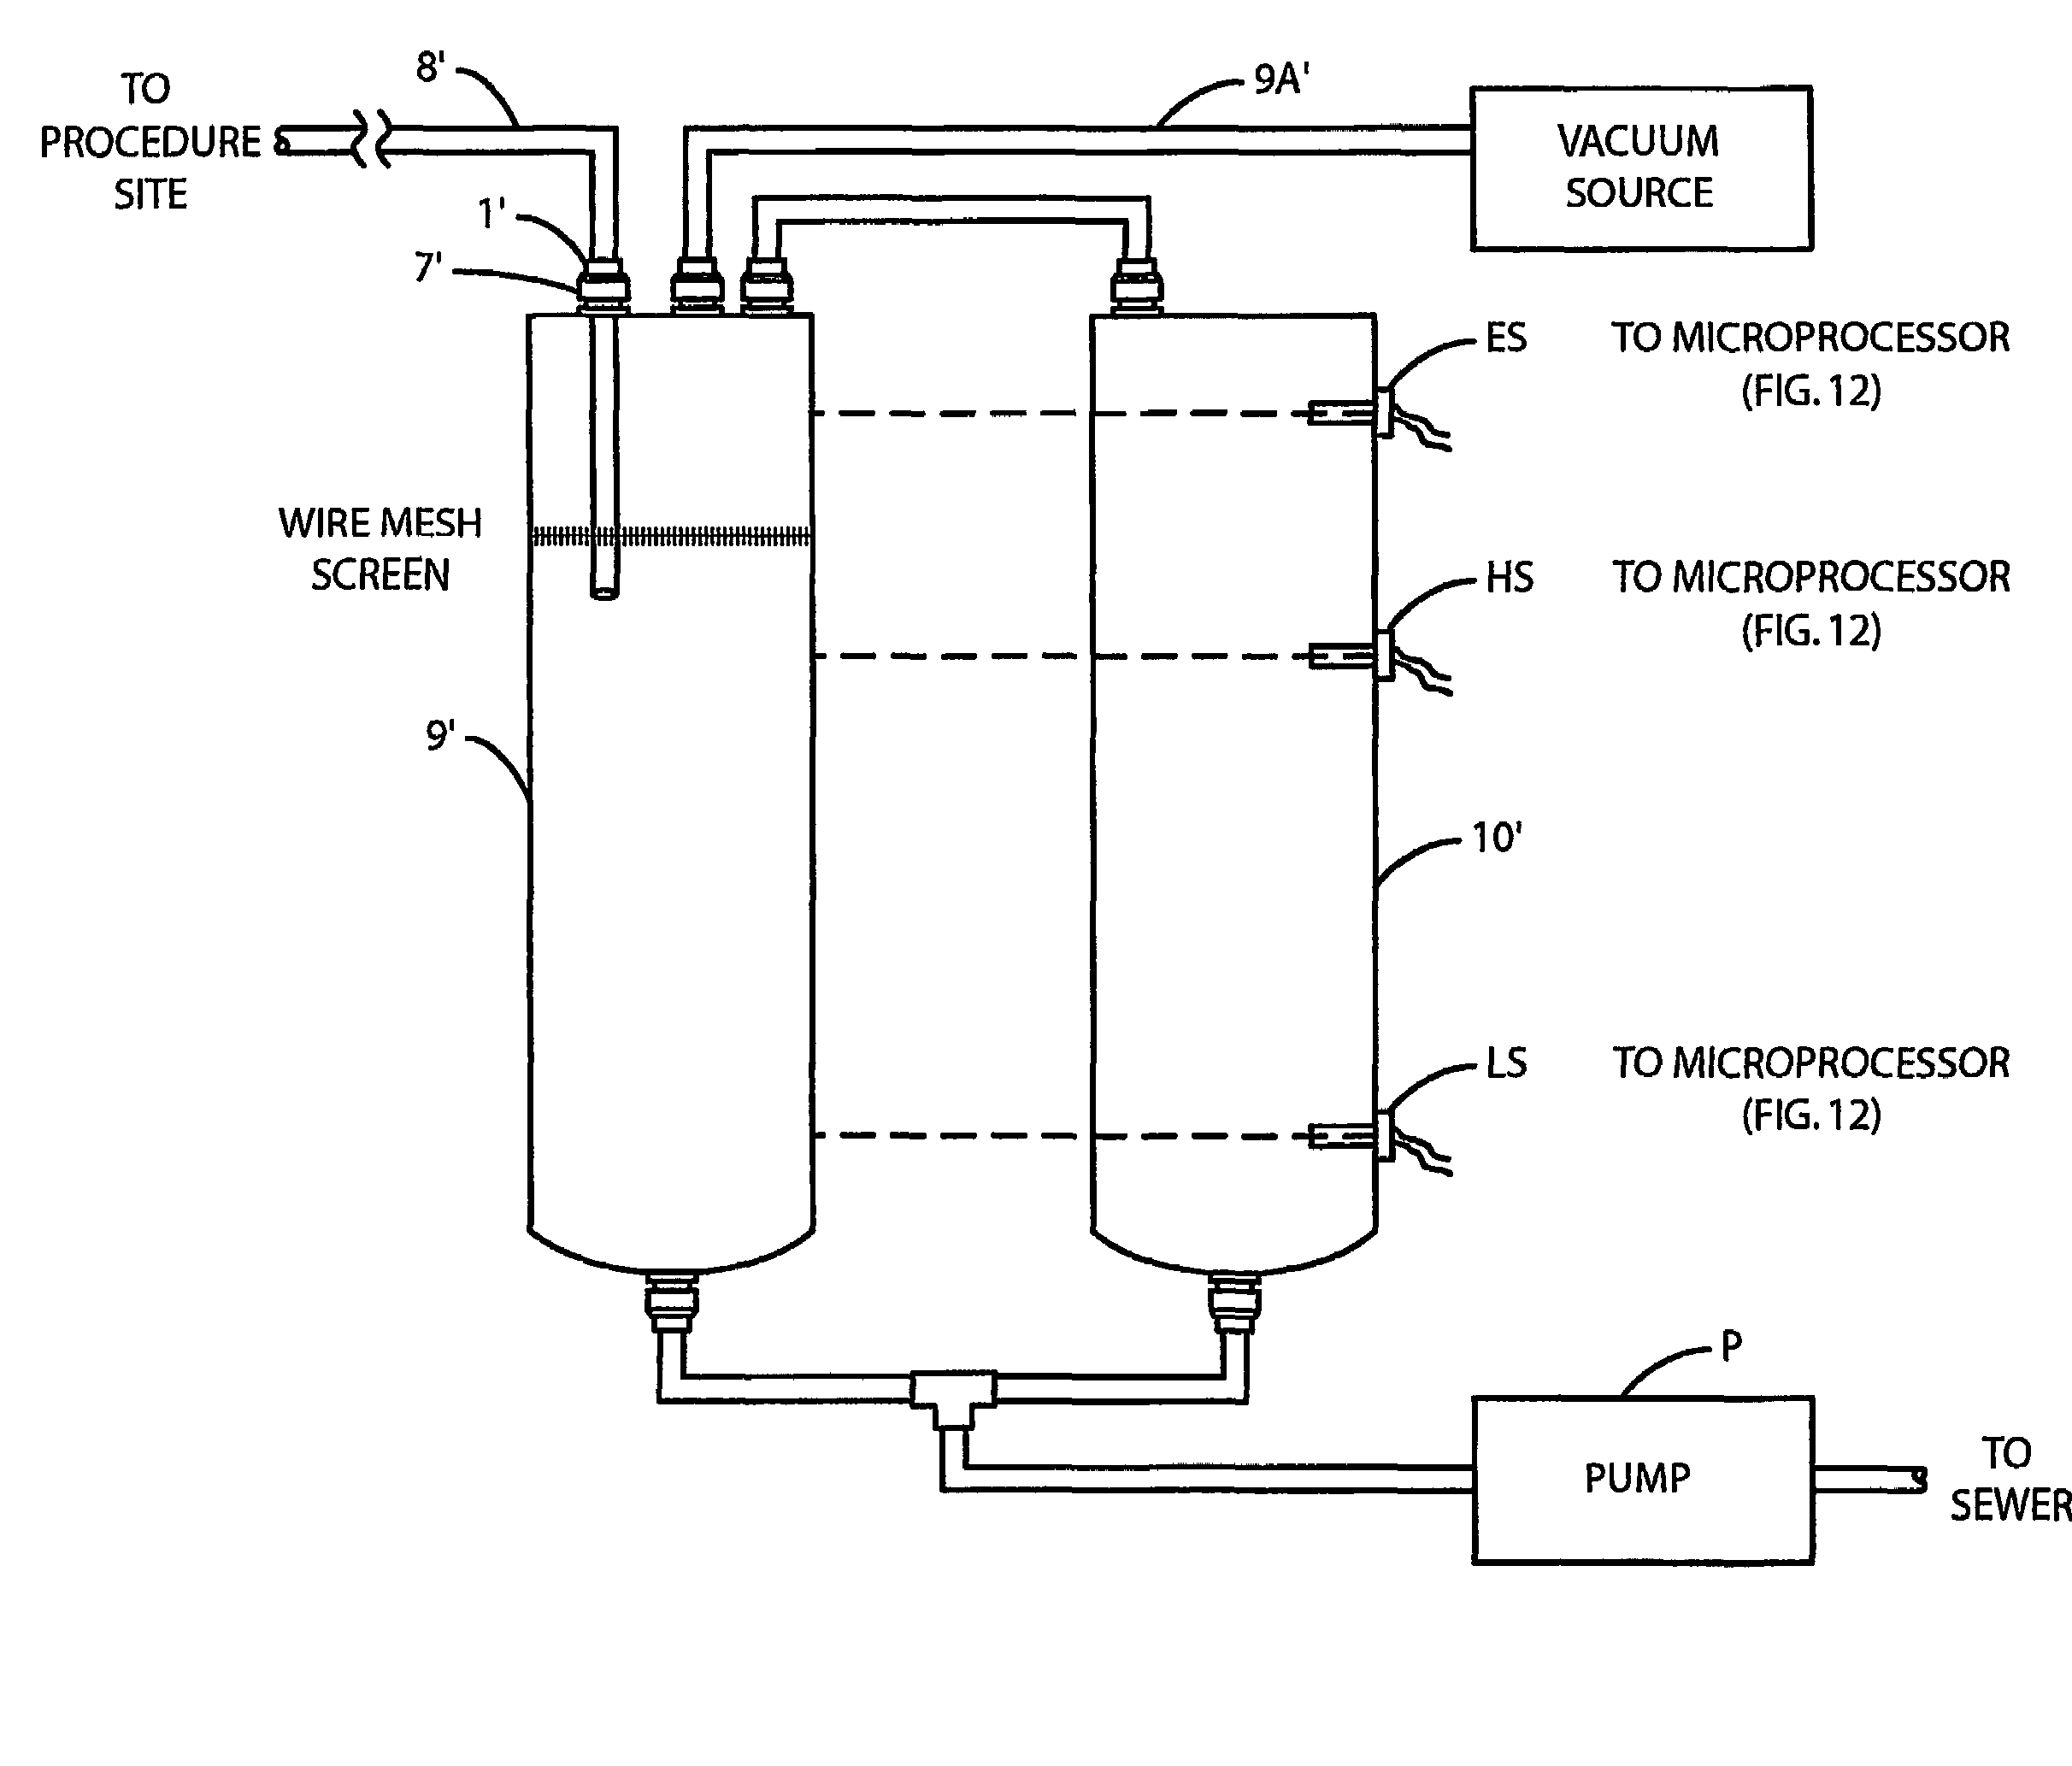 Method and apparatus for disposing of liquid surgical waste for protection of healthcare workers